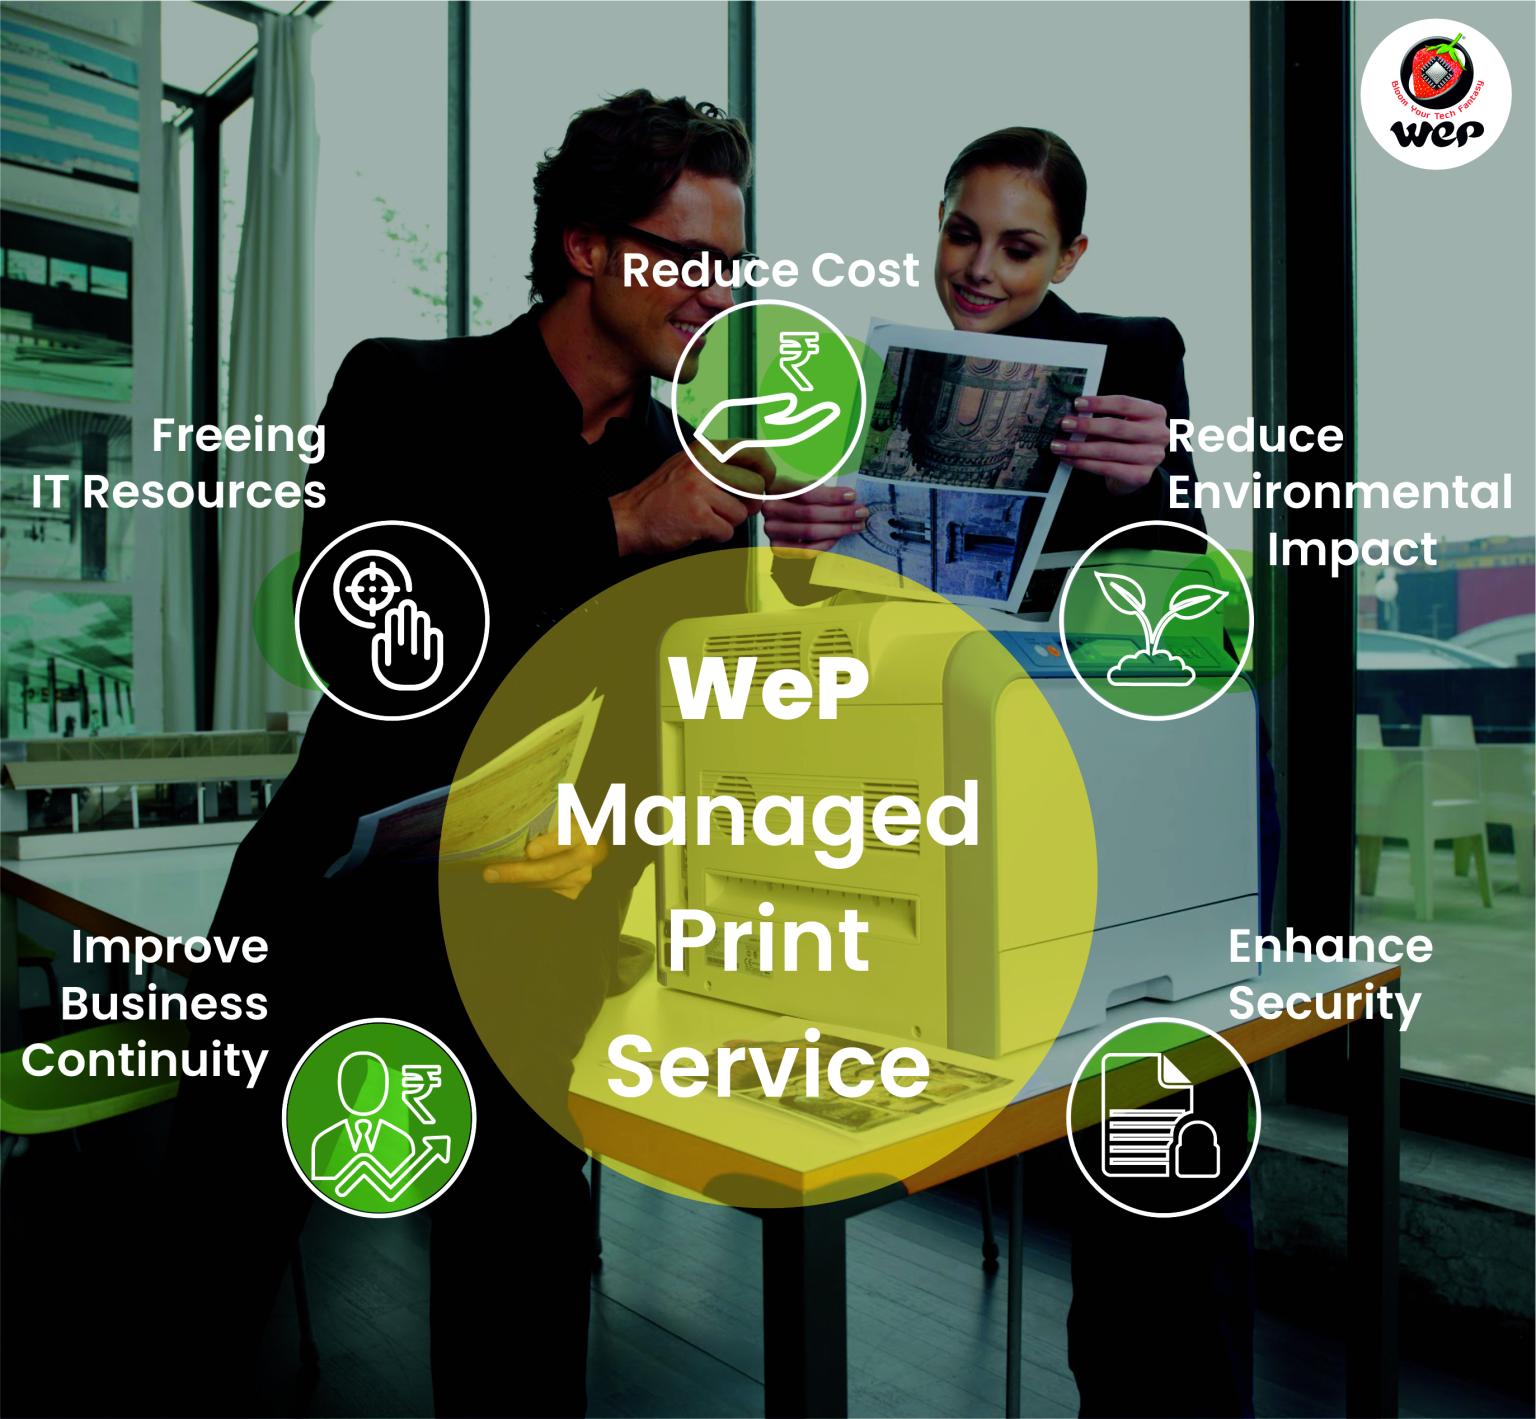 Is Managed Print Service Right for your business?